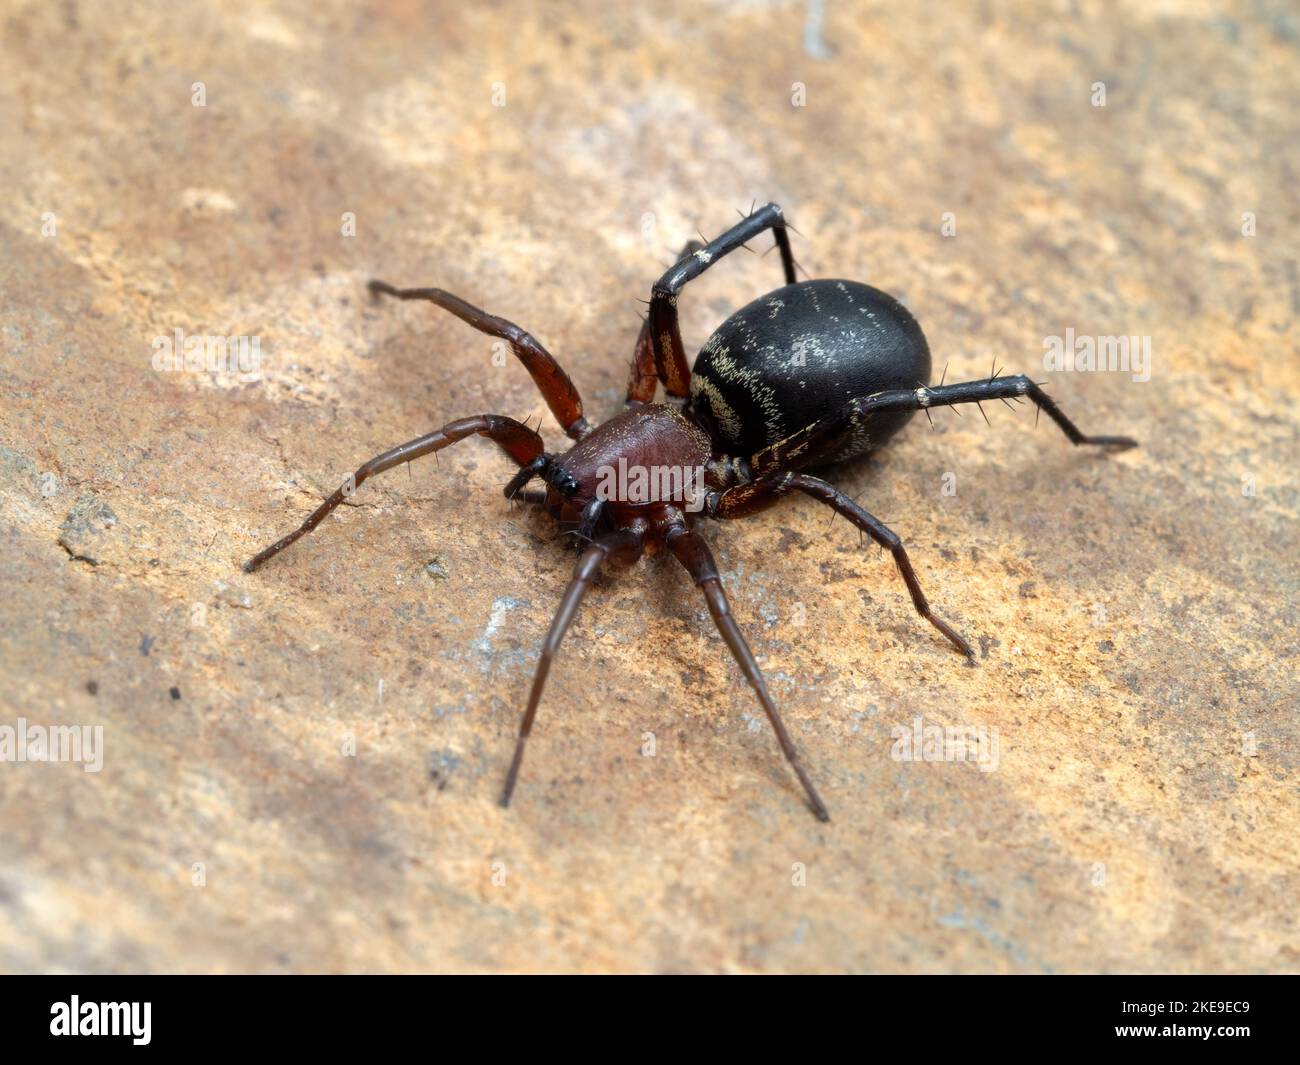 3/4 view of a pretty female long-palped ant-mimic sac spider, Castianeira longipalpas, crawling on a piece of rock Stock Photo